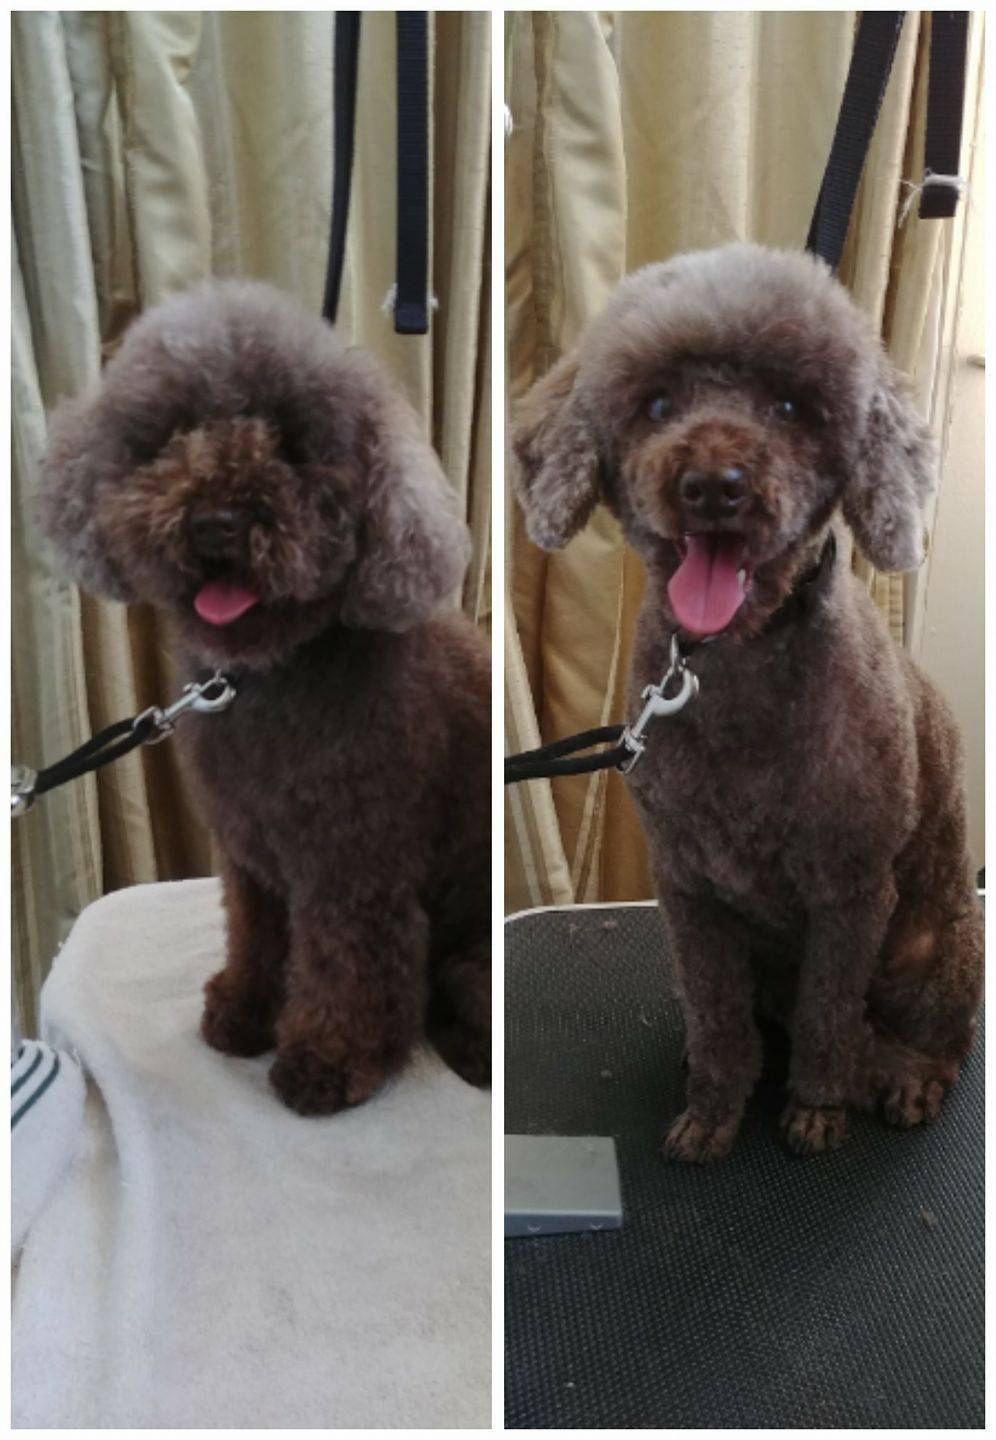 Rylee the Toy Poodle